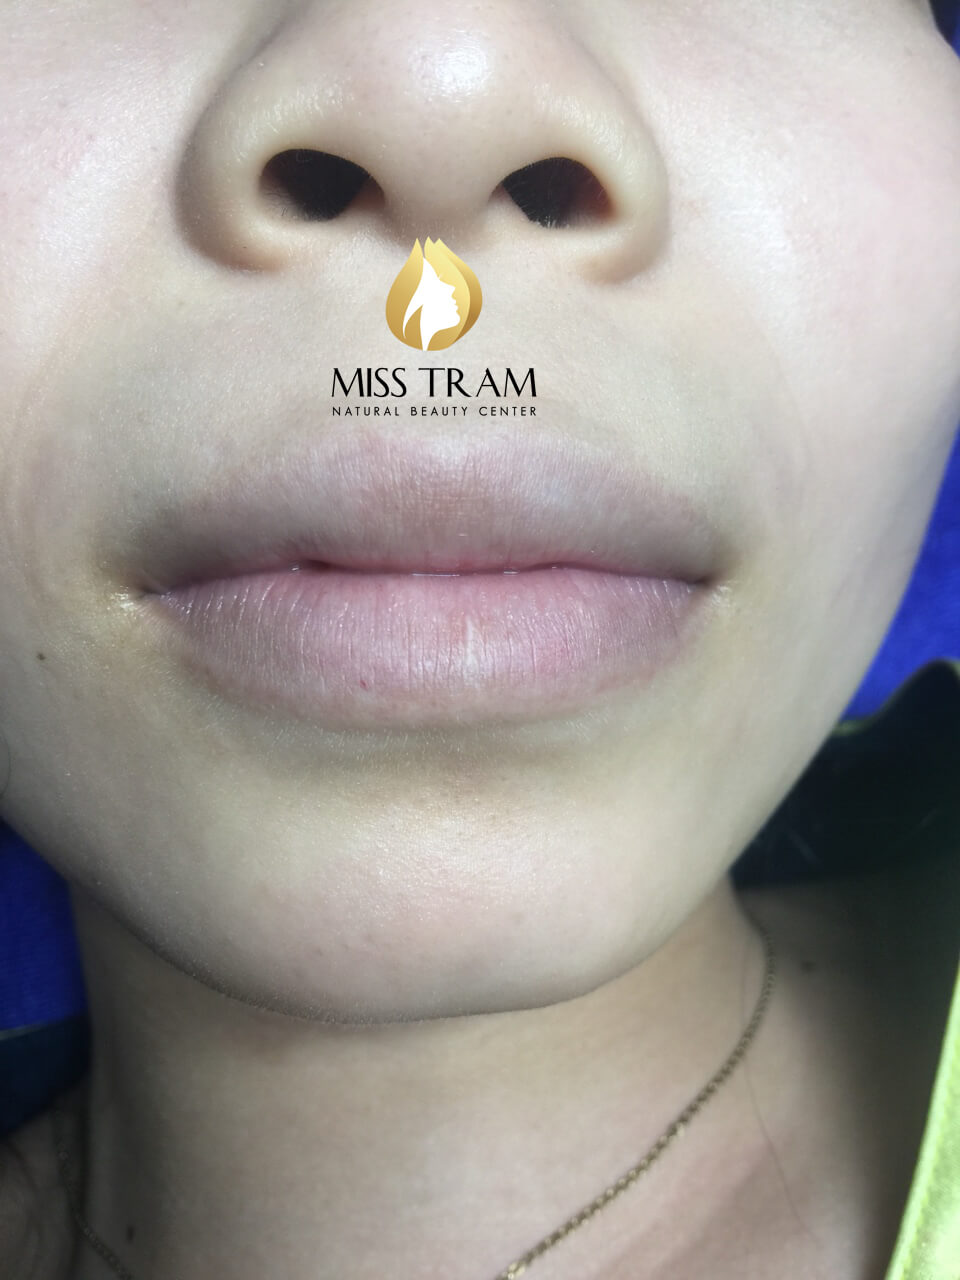 Before And After Queen Lip Sculpture - Actual Customer Photos 5